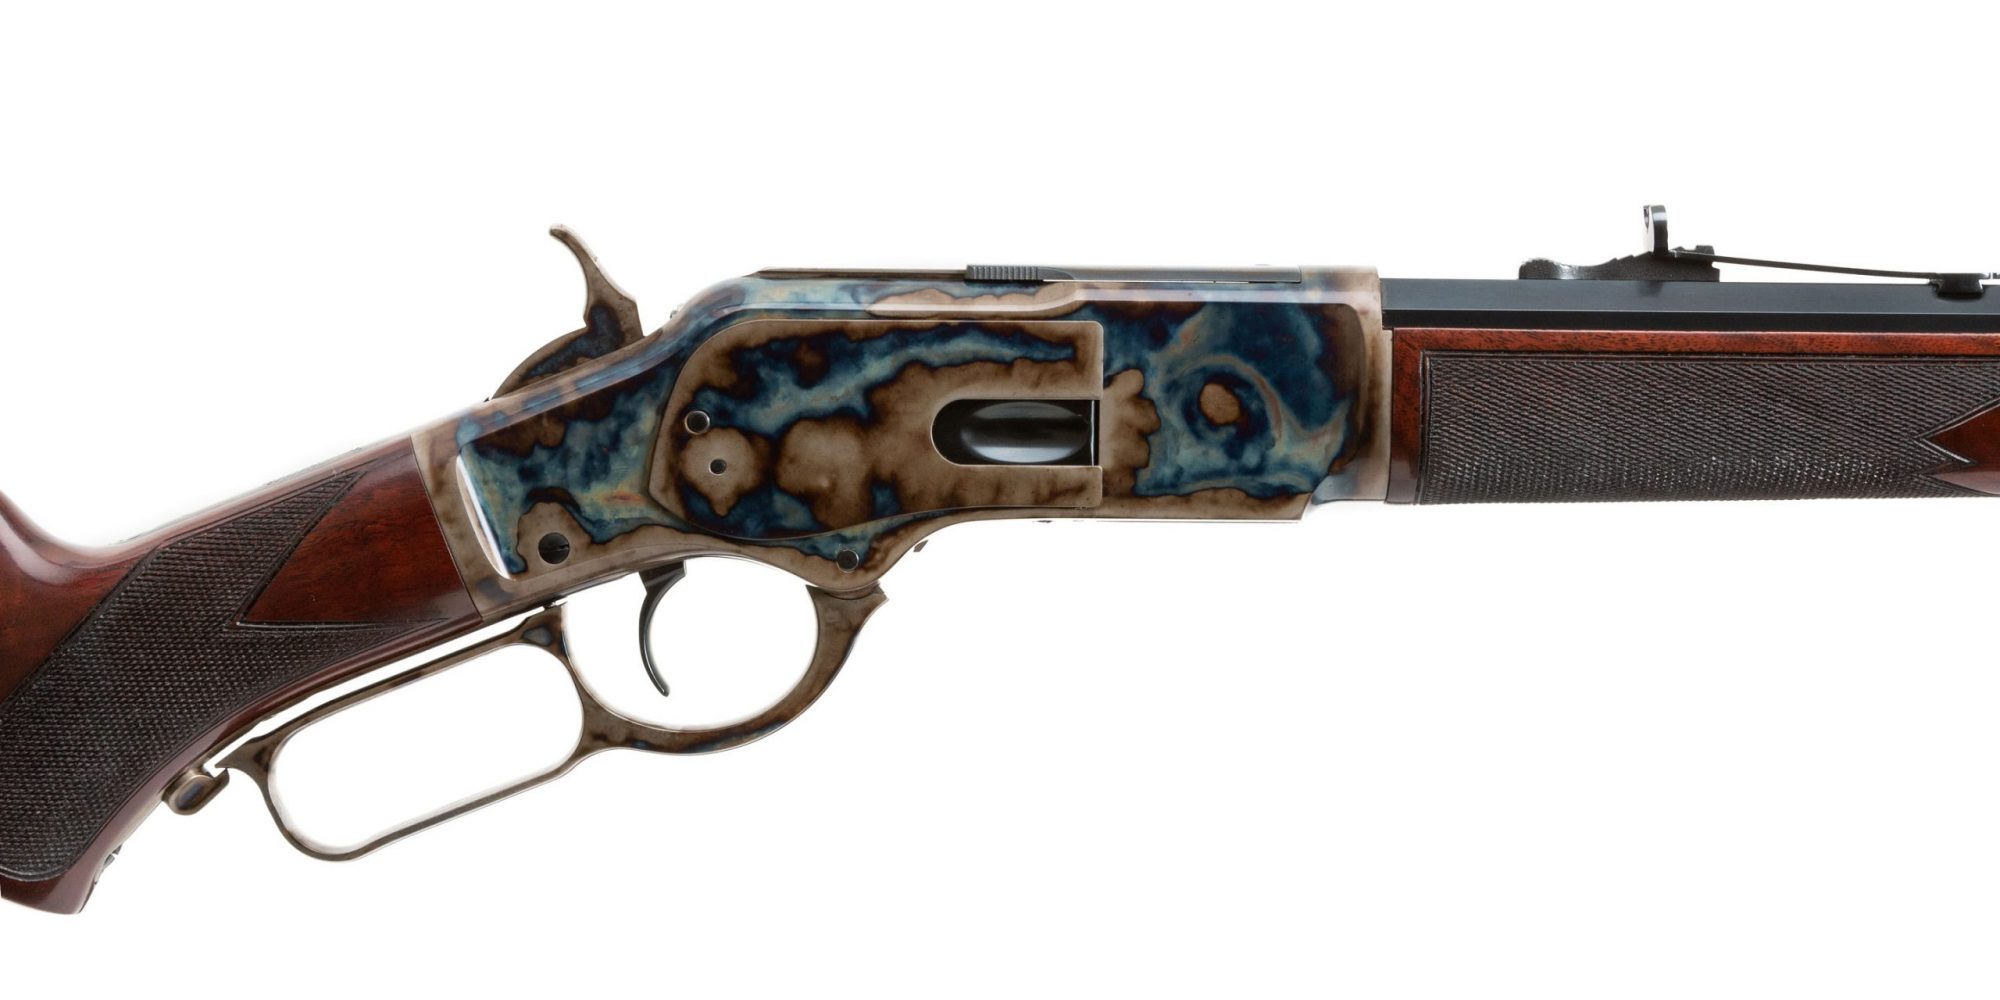 Photo of a new, color case hardened Winchester 1873 rifle, featuring bone charcoal color case hardening by Turnbull Restoration of Bloomfield, NY